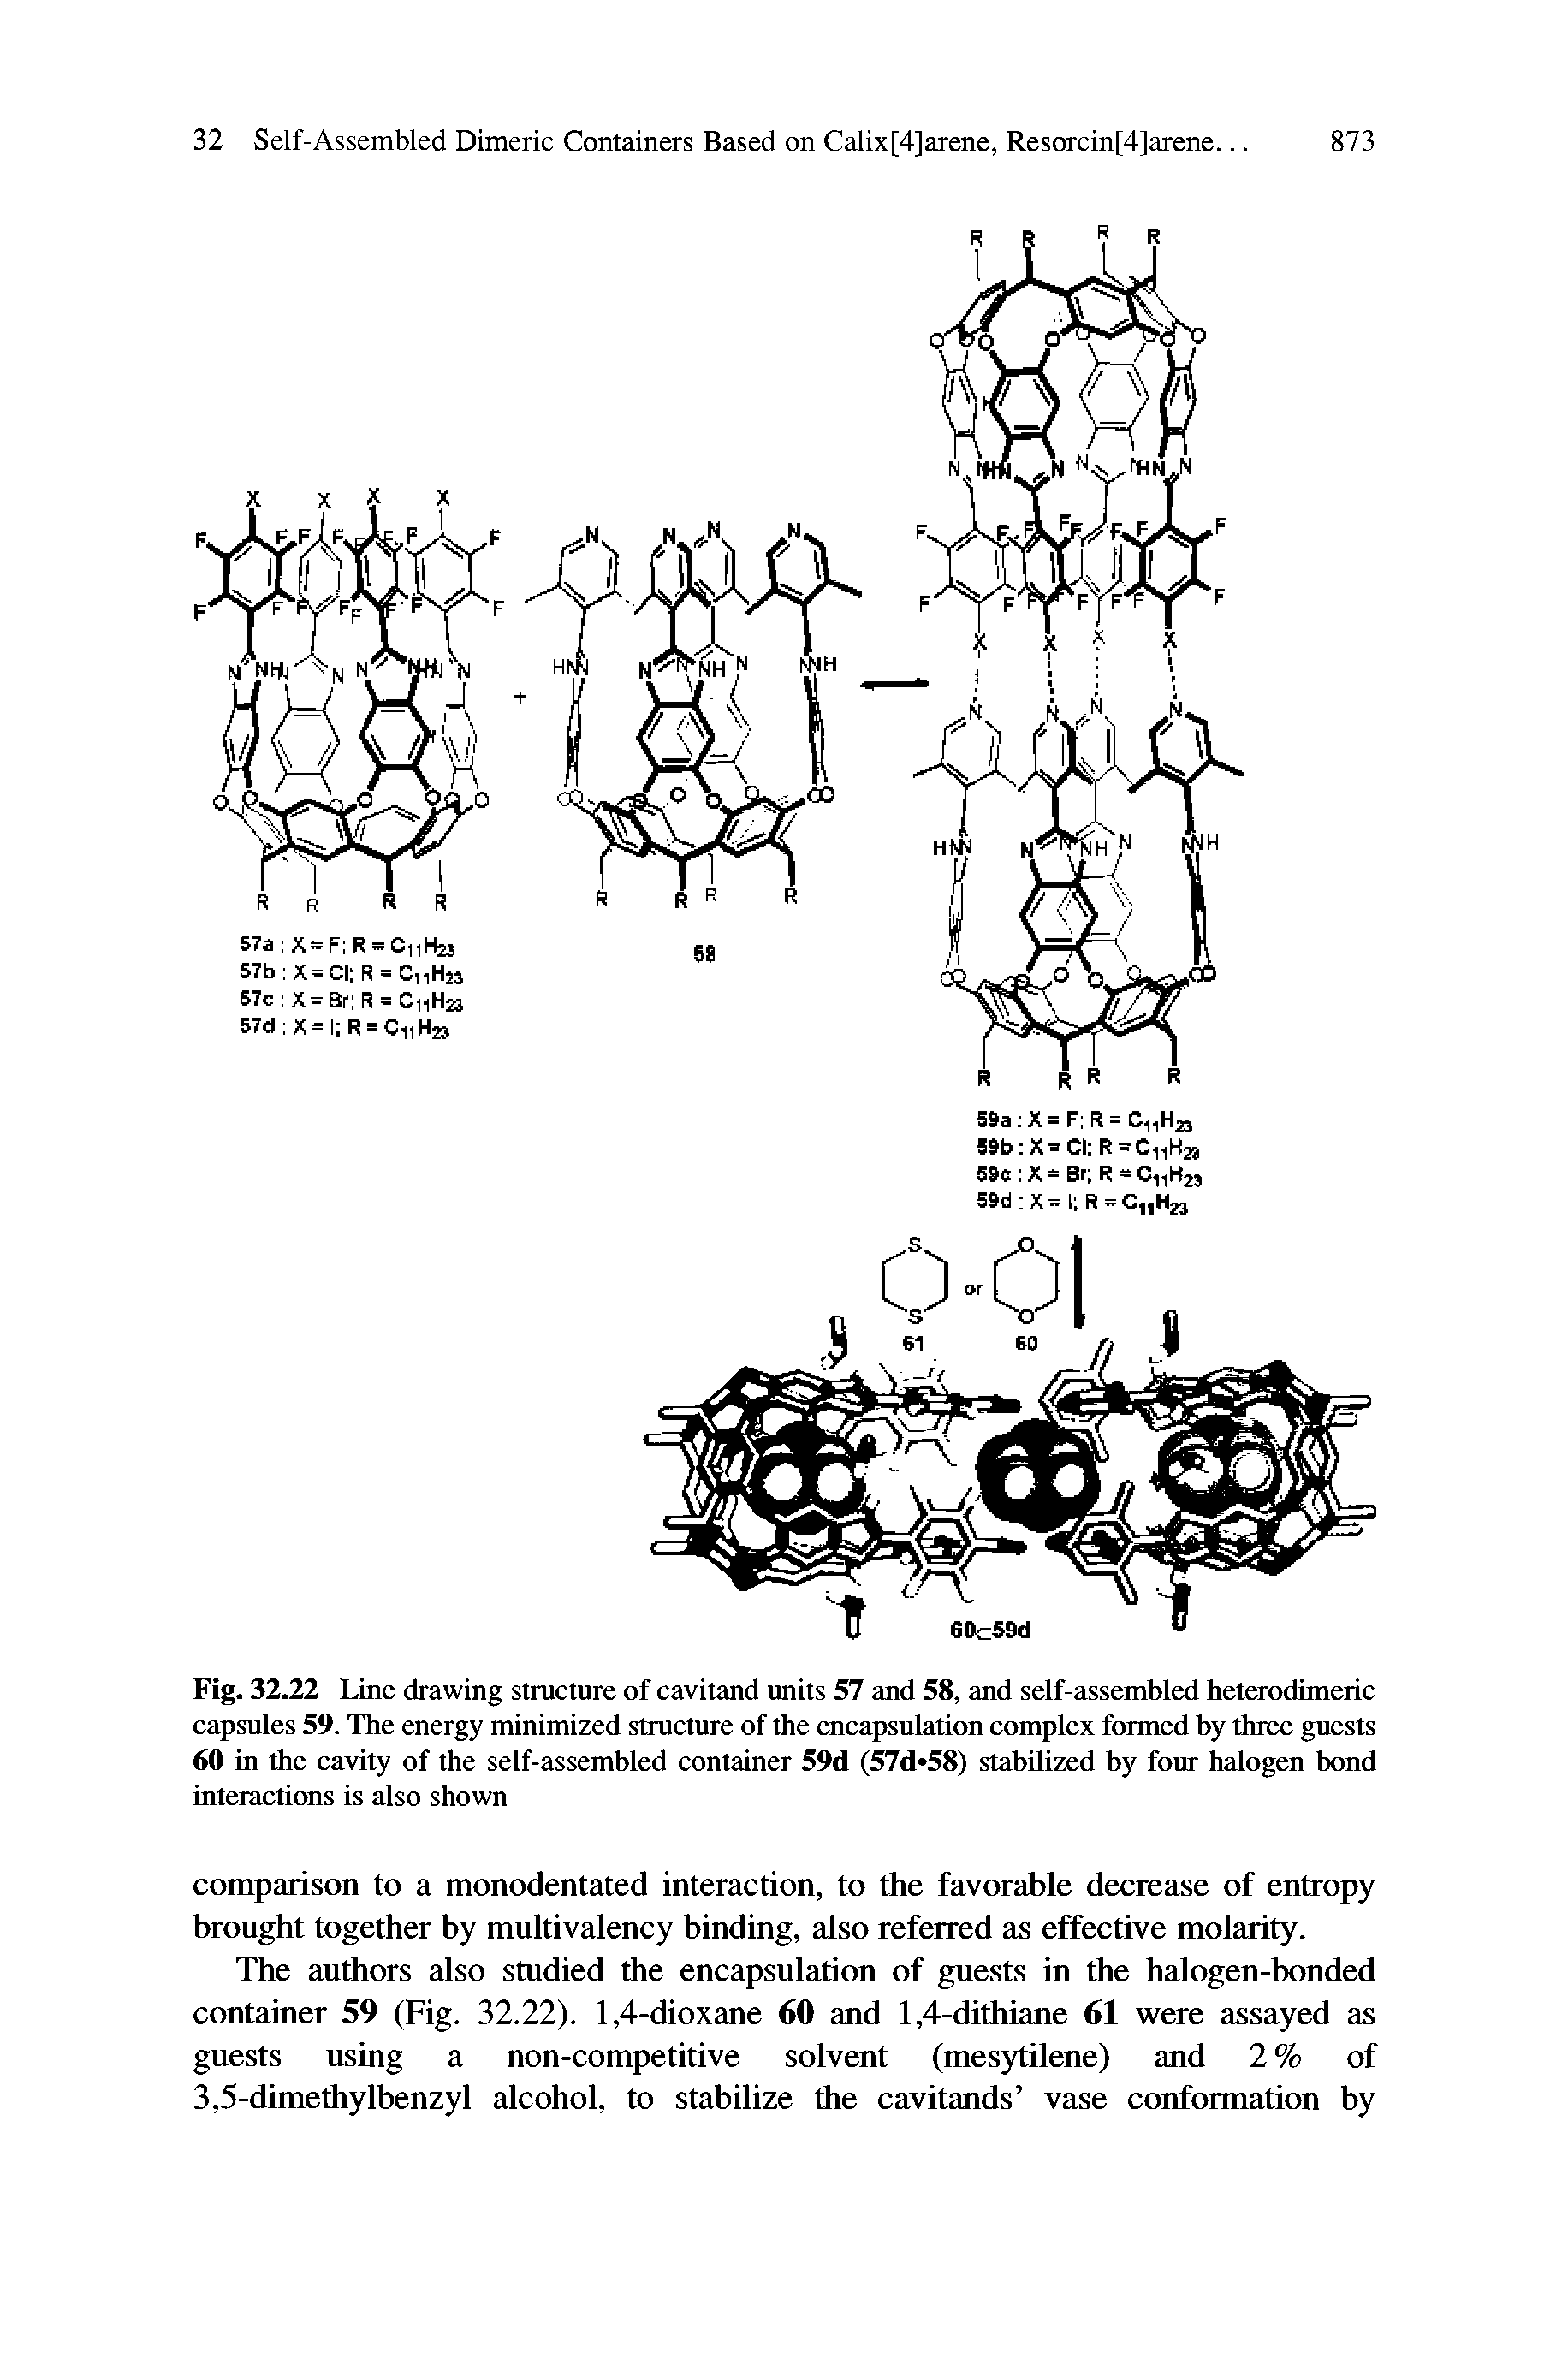 Fig. 32.22 Line drawing structure of cavitand units 57 and 58, and self-assembled heterodimeric capsules 59. The energy minimized structure of the encapsulation complex formed by three guests 60 in the cavity of the self-assembled container 59d (57d 58) stabilized by four halogen bond interactions is also shown...